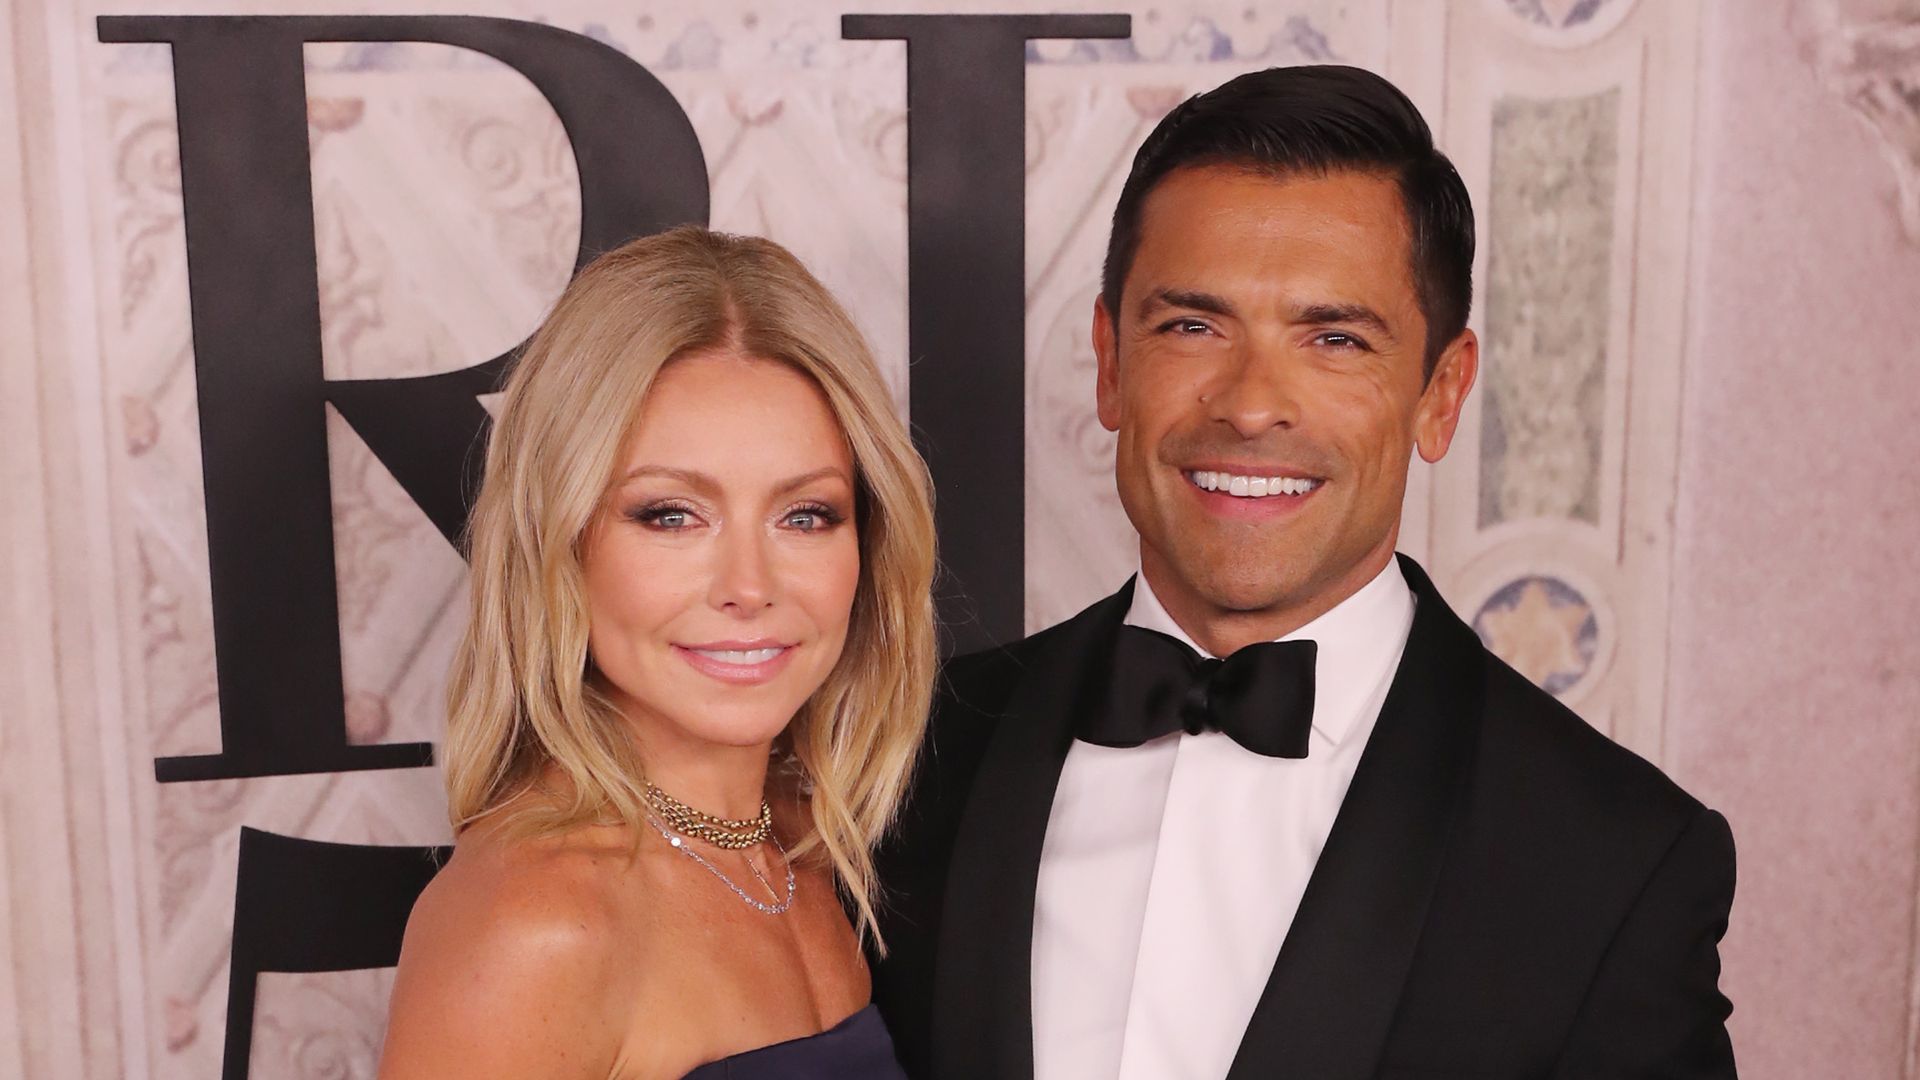 Kelly Ripa and Mark Consuelos attends the Ralph Lauren fashion show during New York Fashion Week at Bethesda Terrace on September 7, 2018 in New York City